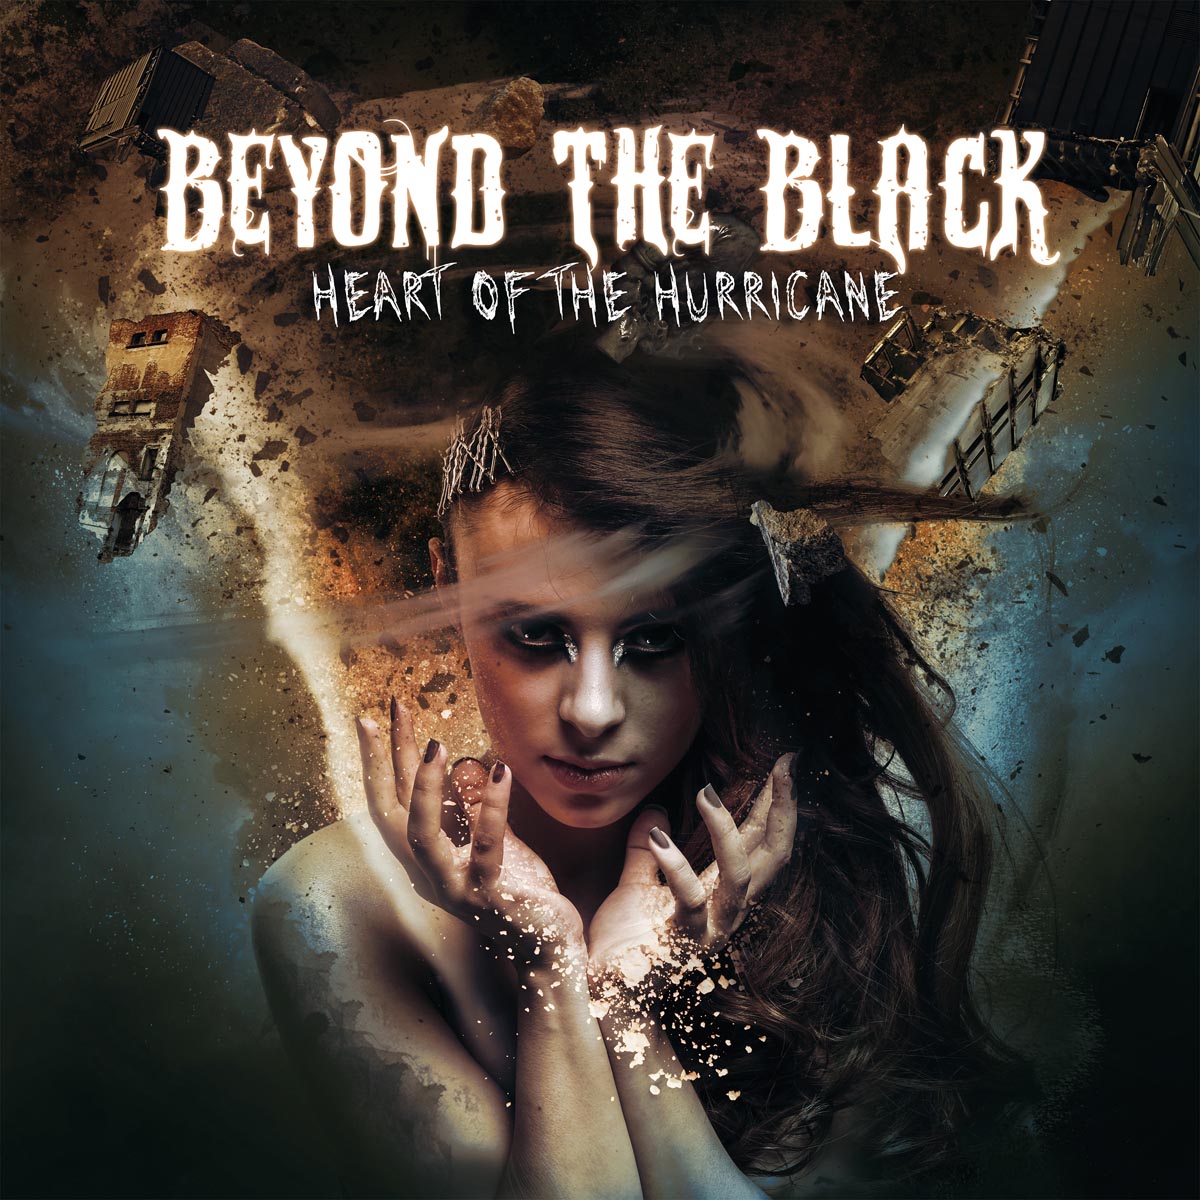 Beyond The Black – Heart Of The Hurricane (Album Review)